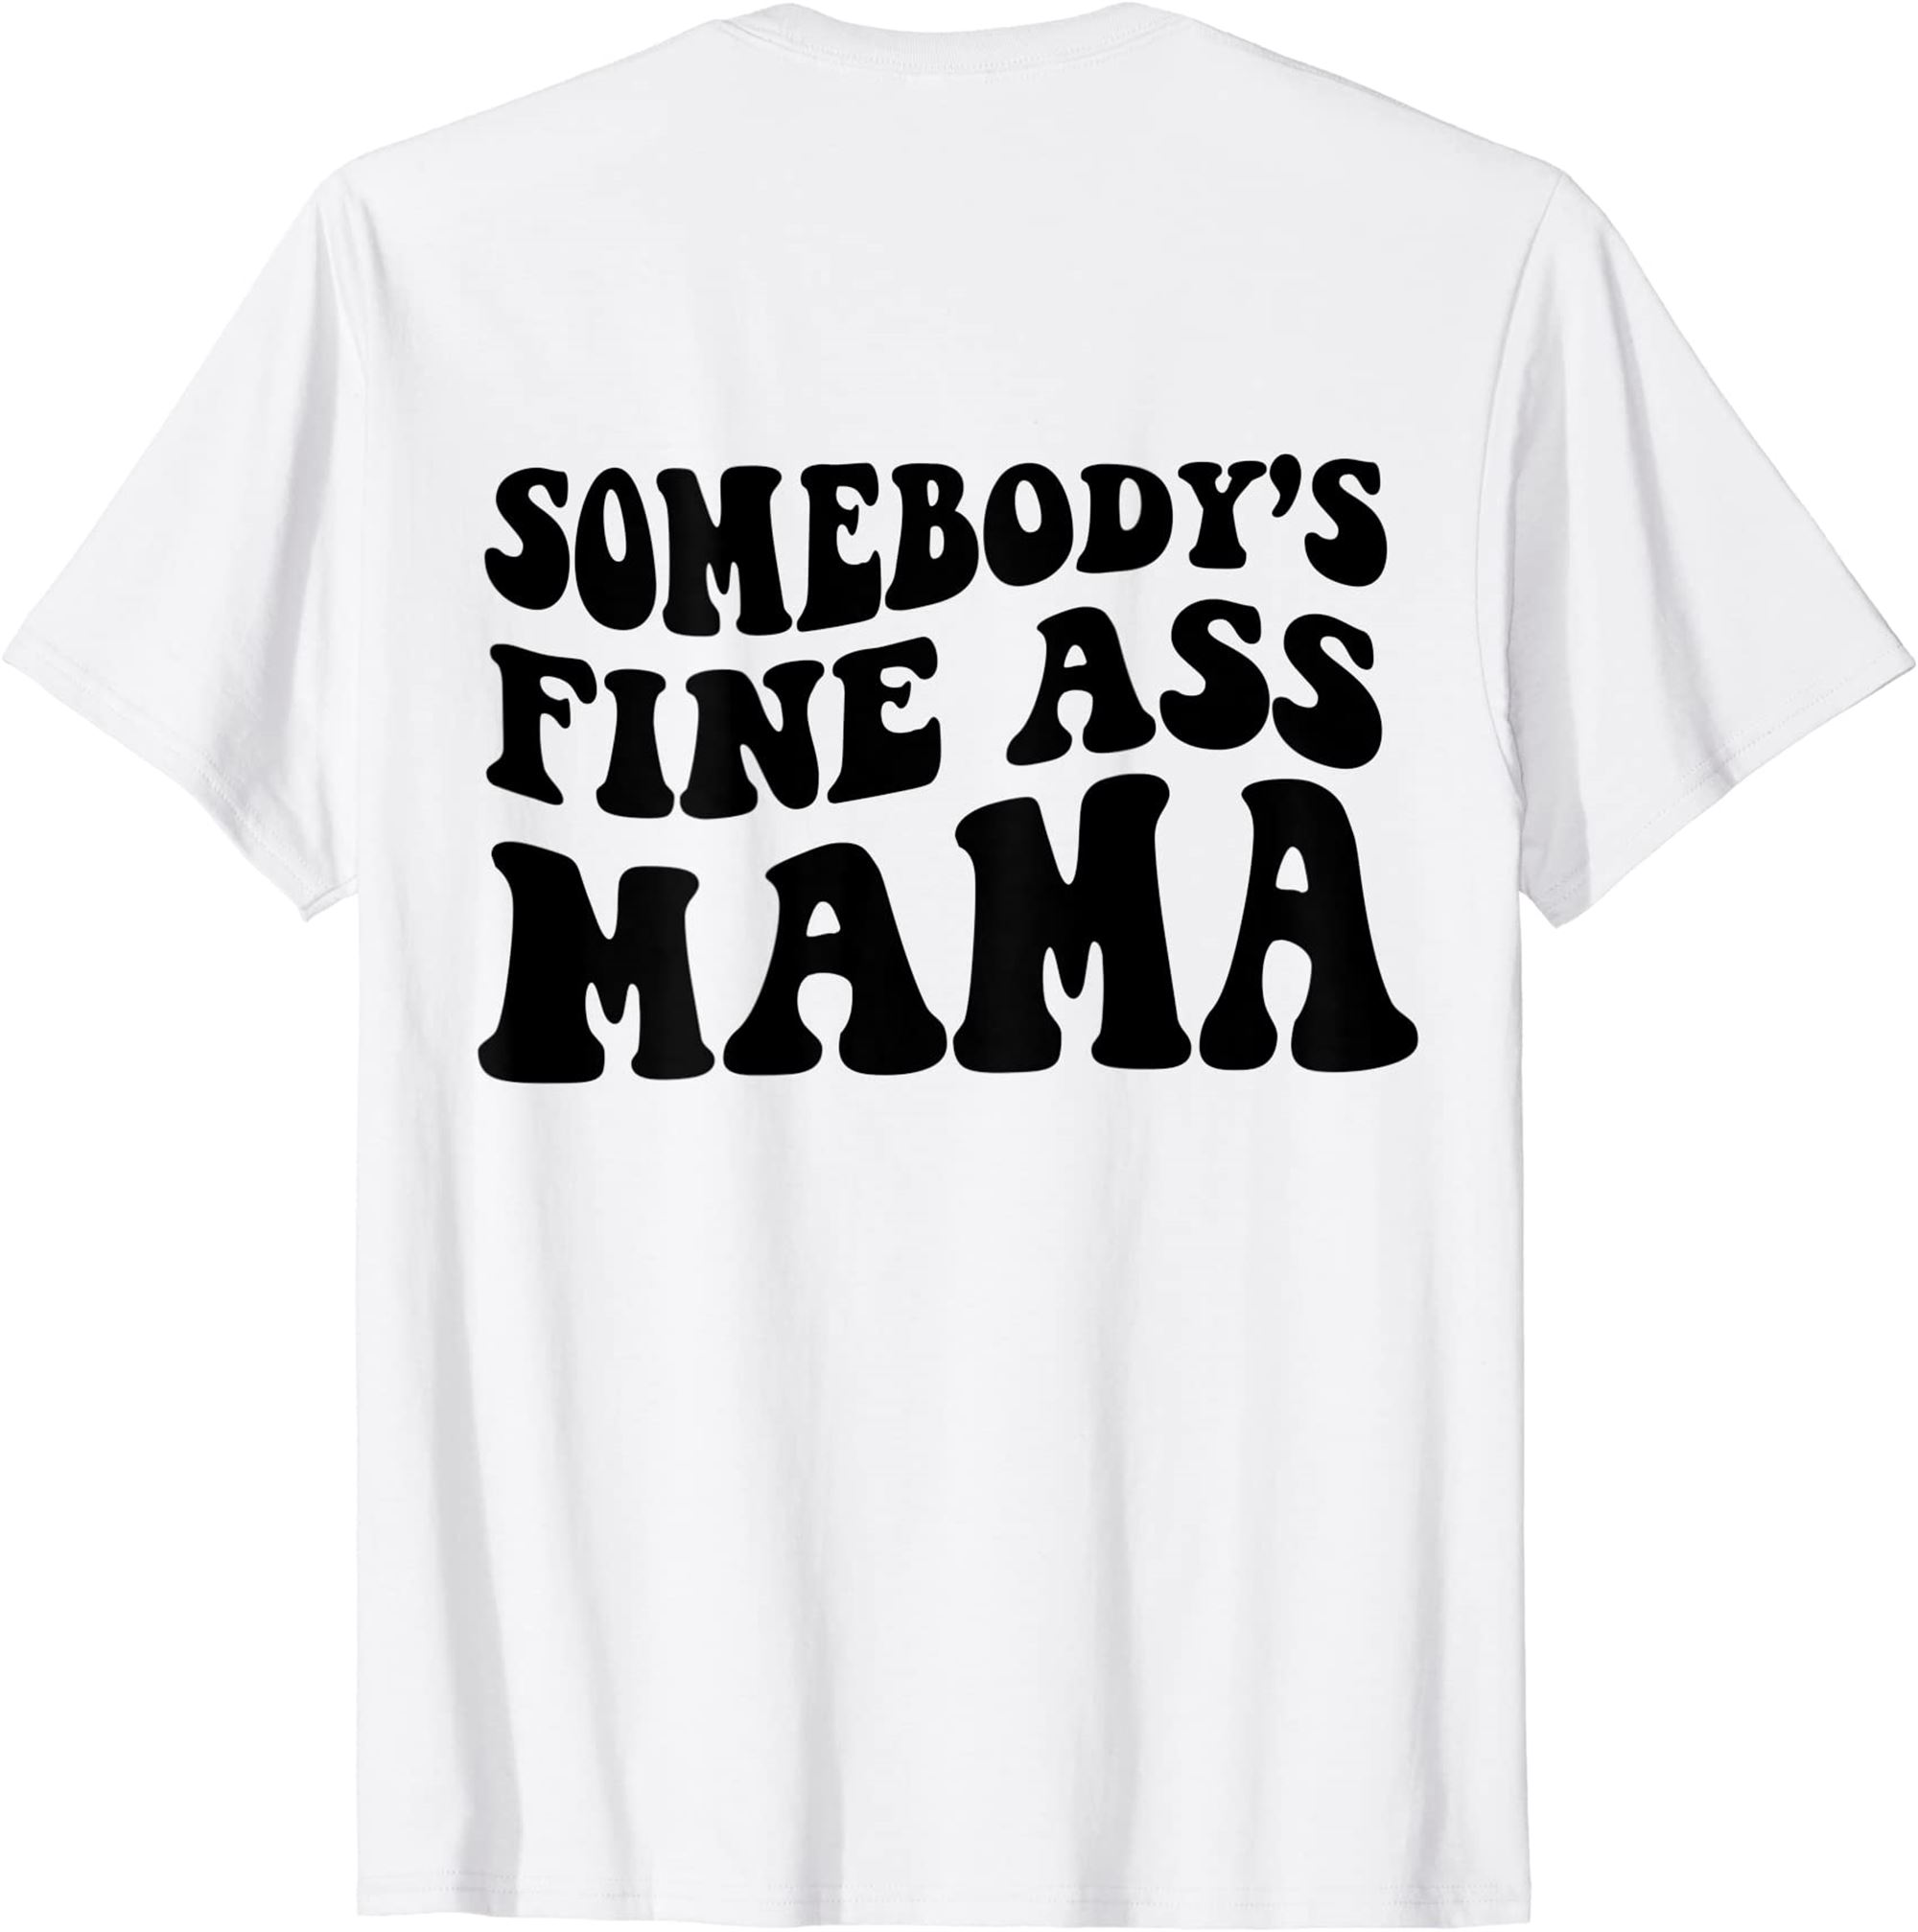 Somebodys Fine Ass Mama Funny Saying Milf Hot Momma T-shirt Full Size Up To 5xl